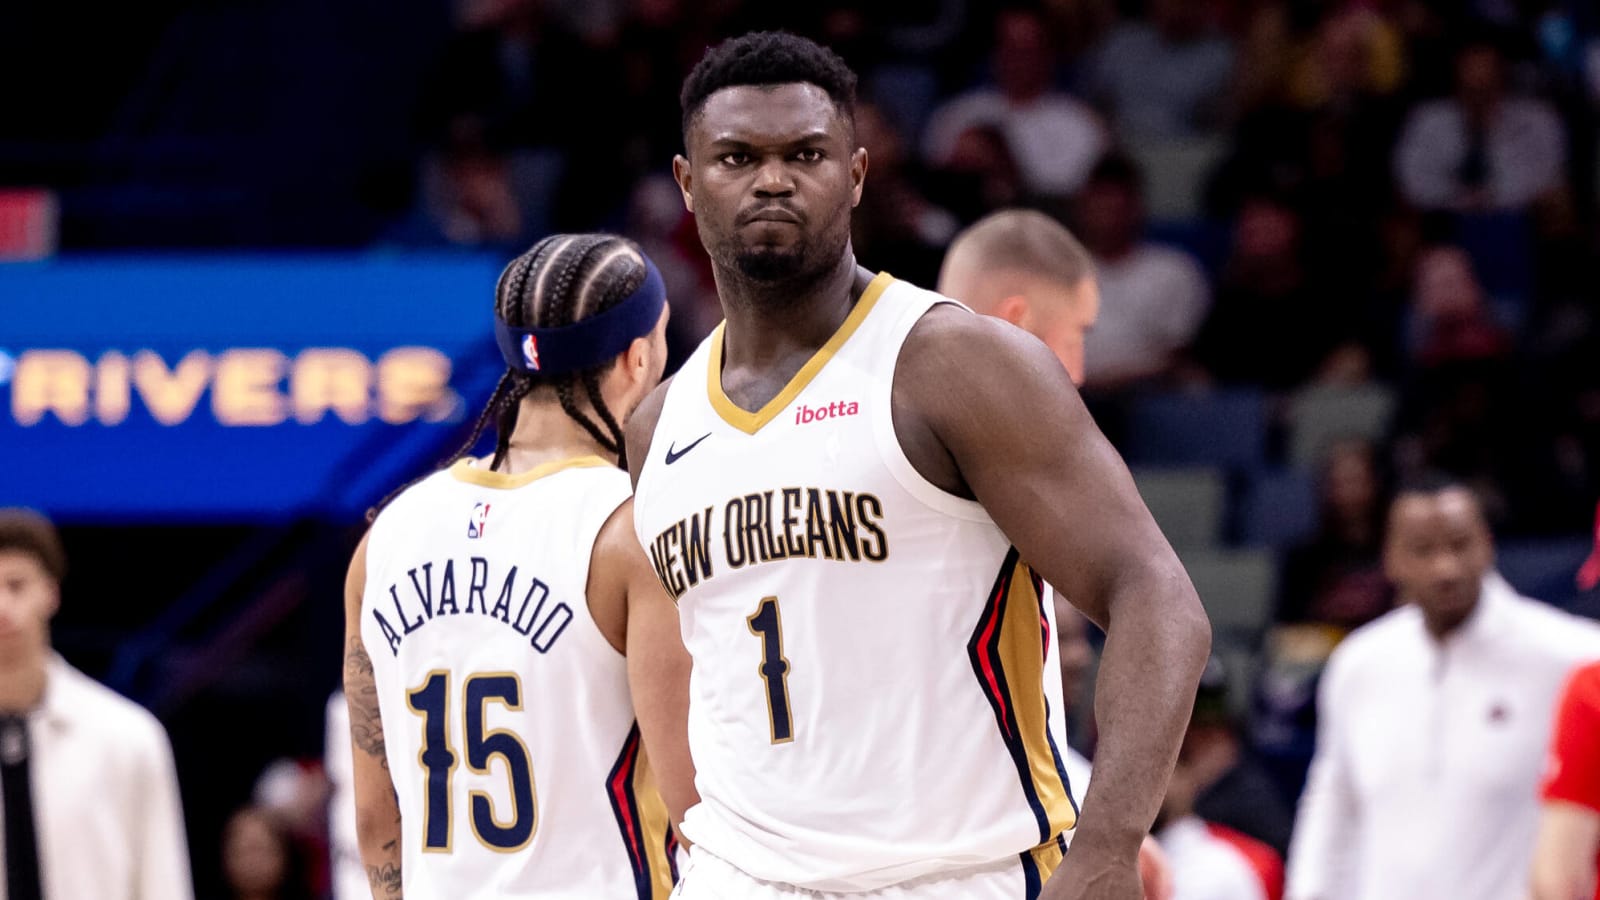 Zion Williamson has rediscovered his love for basketball